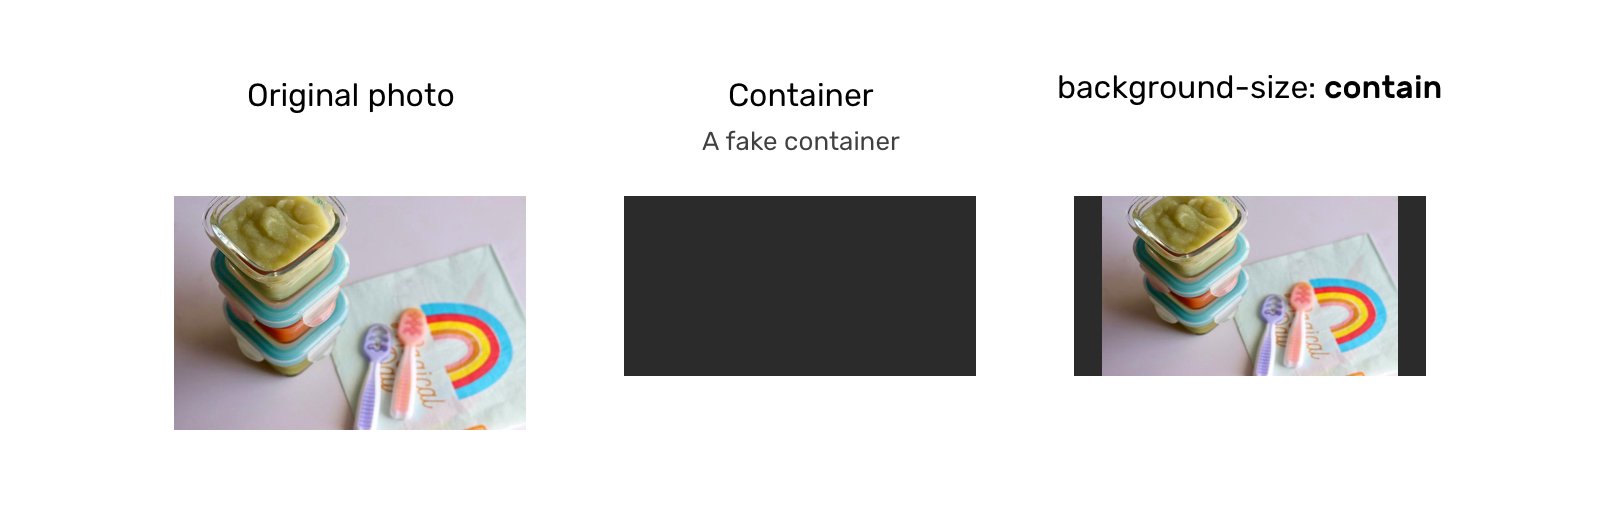 background-size: contain